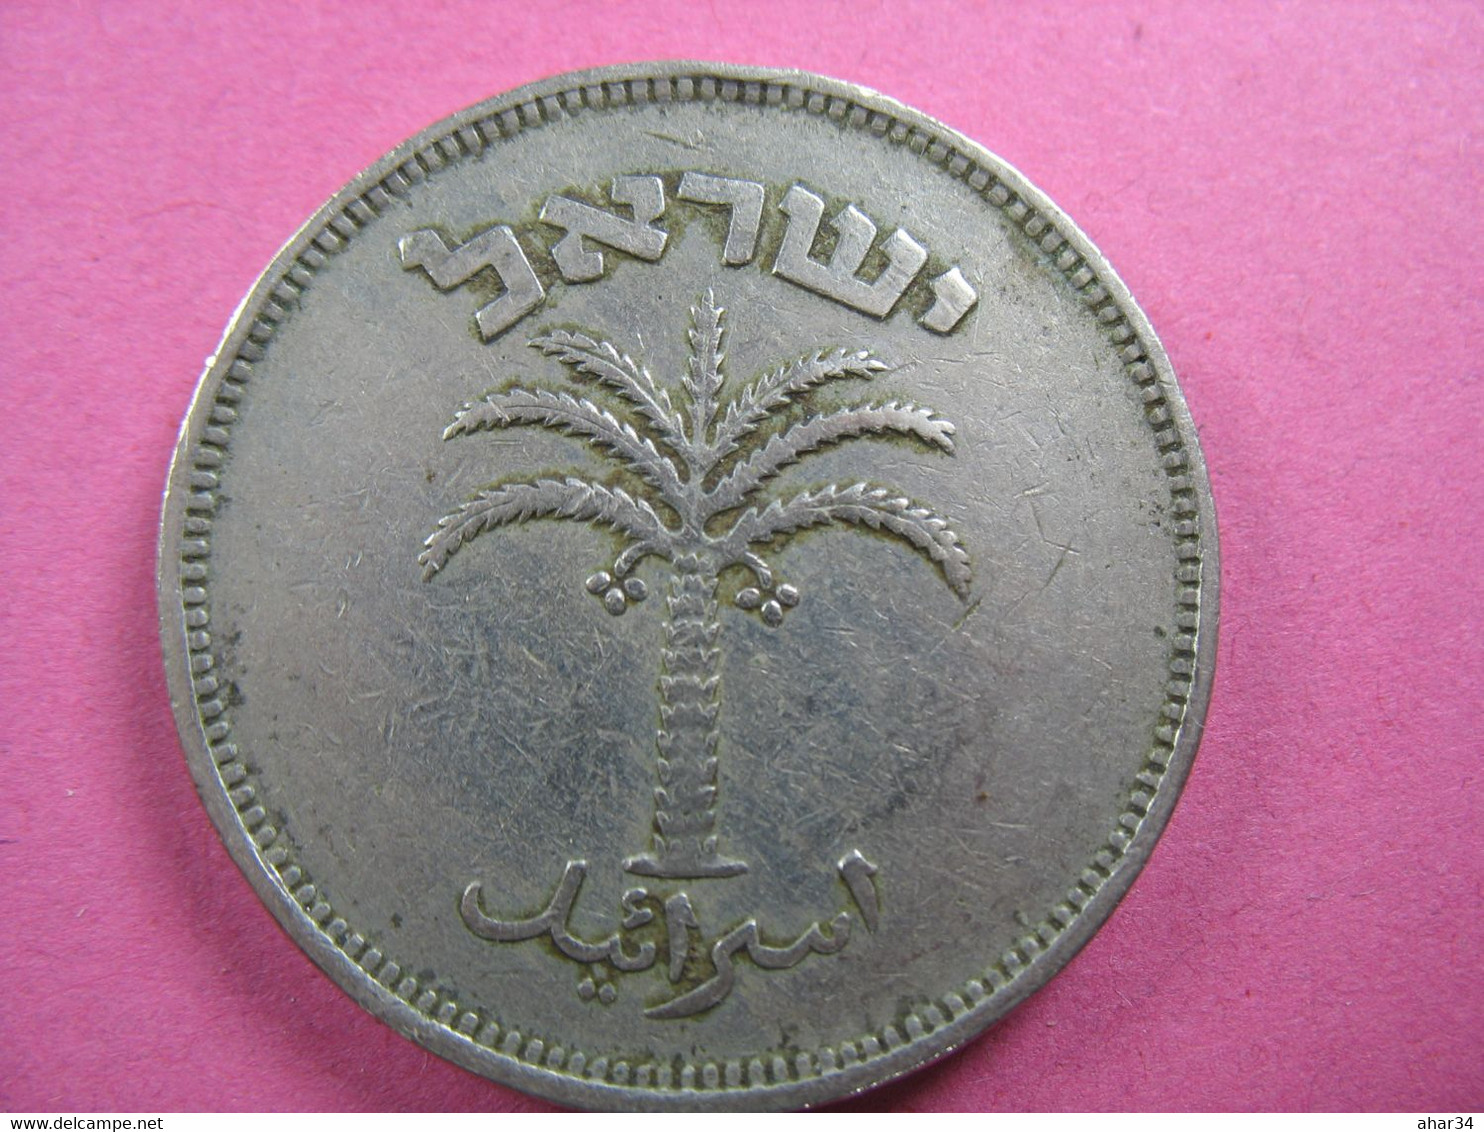 TEMPLATE LISTING ISRAEL  LOT OF  200  COINS 100 PRUTA PRUTOT 1949  COIN FREE SHIPPING  BY SURFACE REGISTERED MAIL. . - Andere - Azië